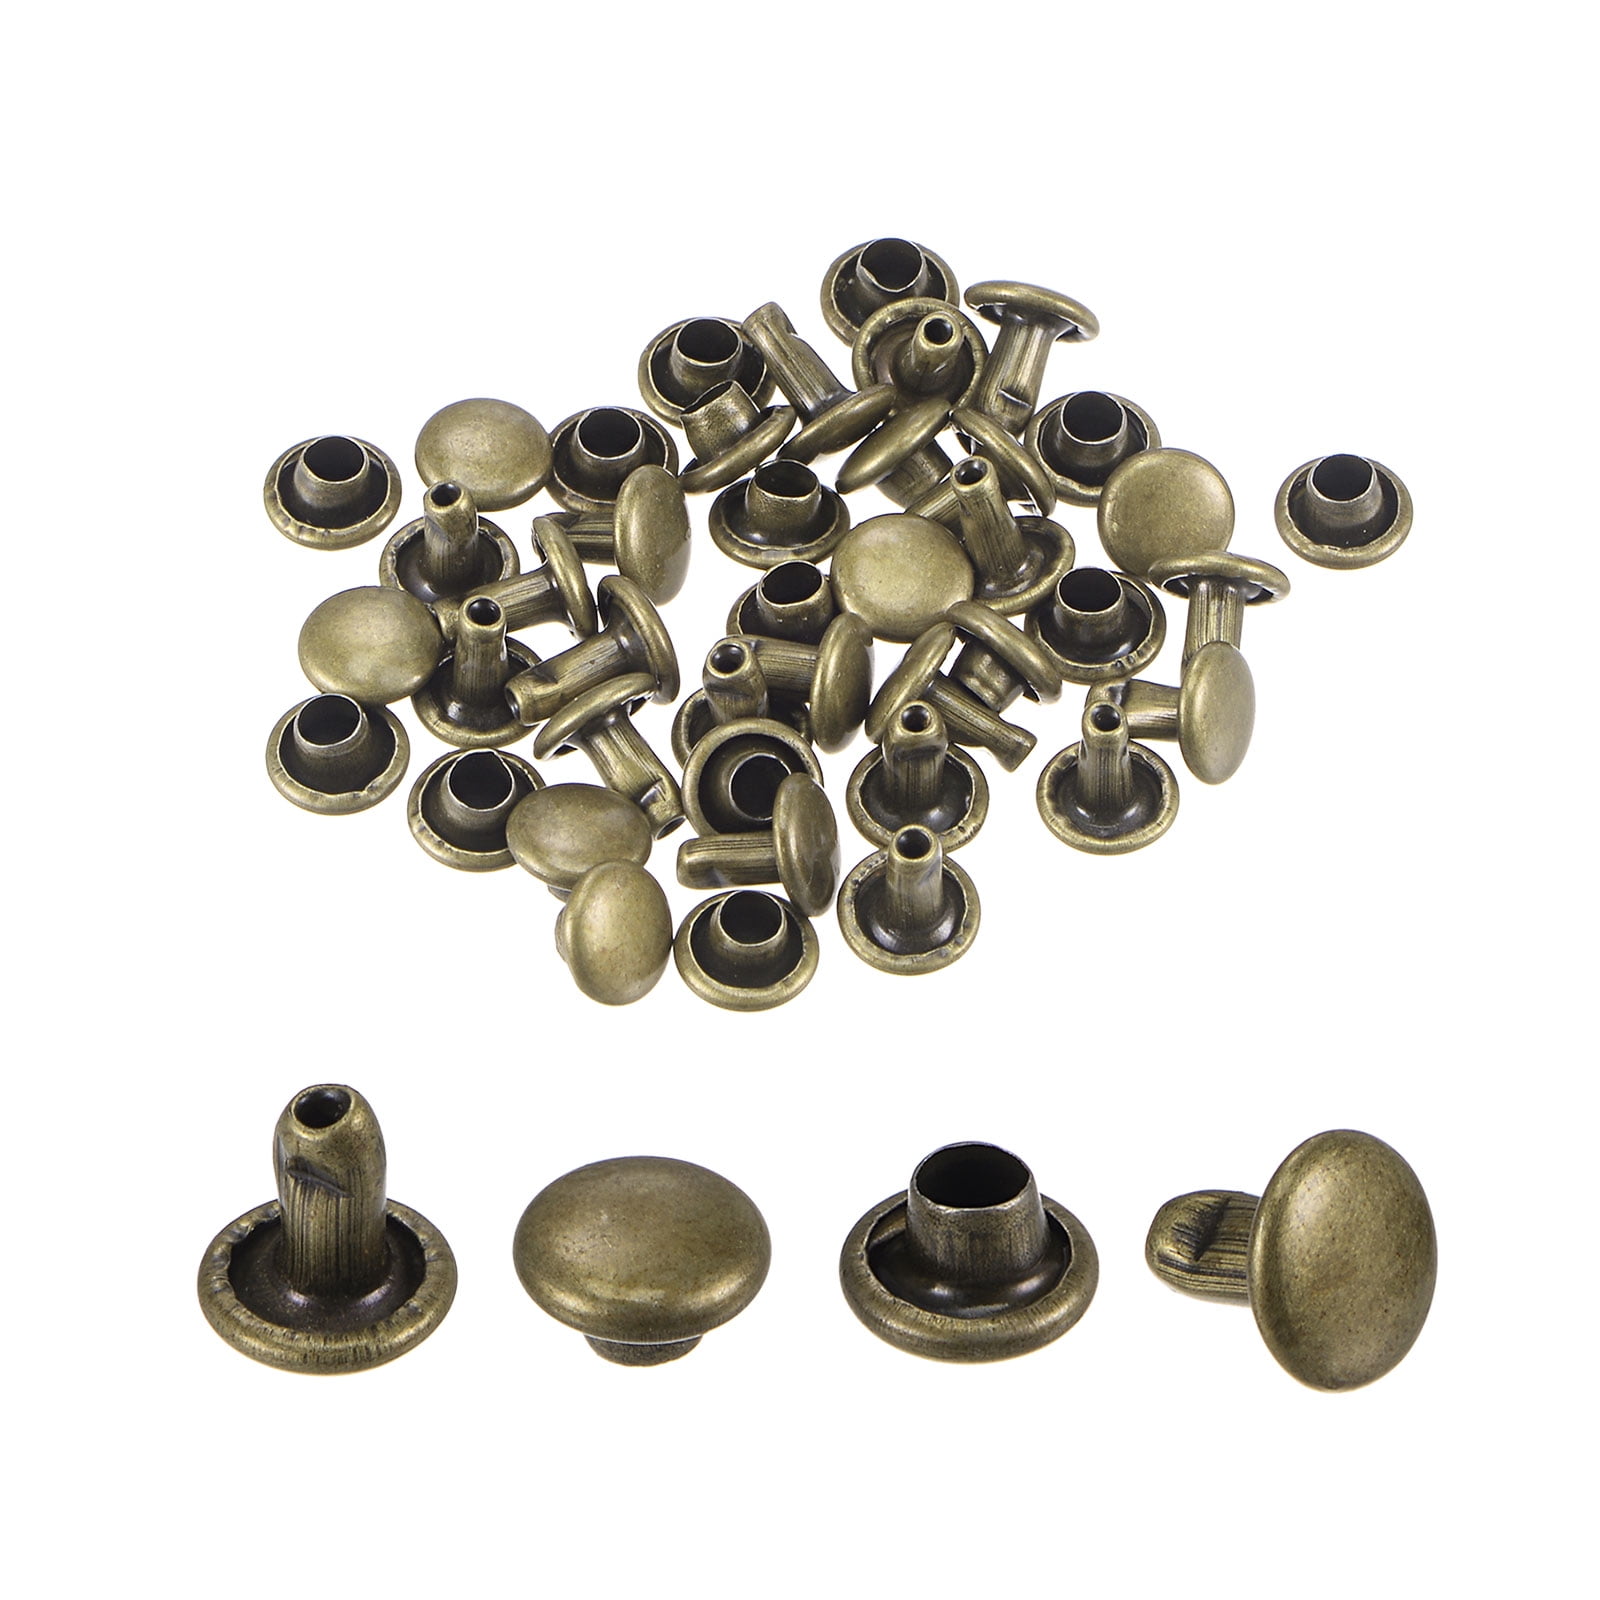 Denailey Brass Rivet Kit 480 Sets 7 mm Double Cap Leather Rivet Dome Rivets Metal Studs 5 Colors 4 Sizes with 4 Pieces Setting Tools for Leather Craft/Bags